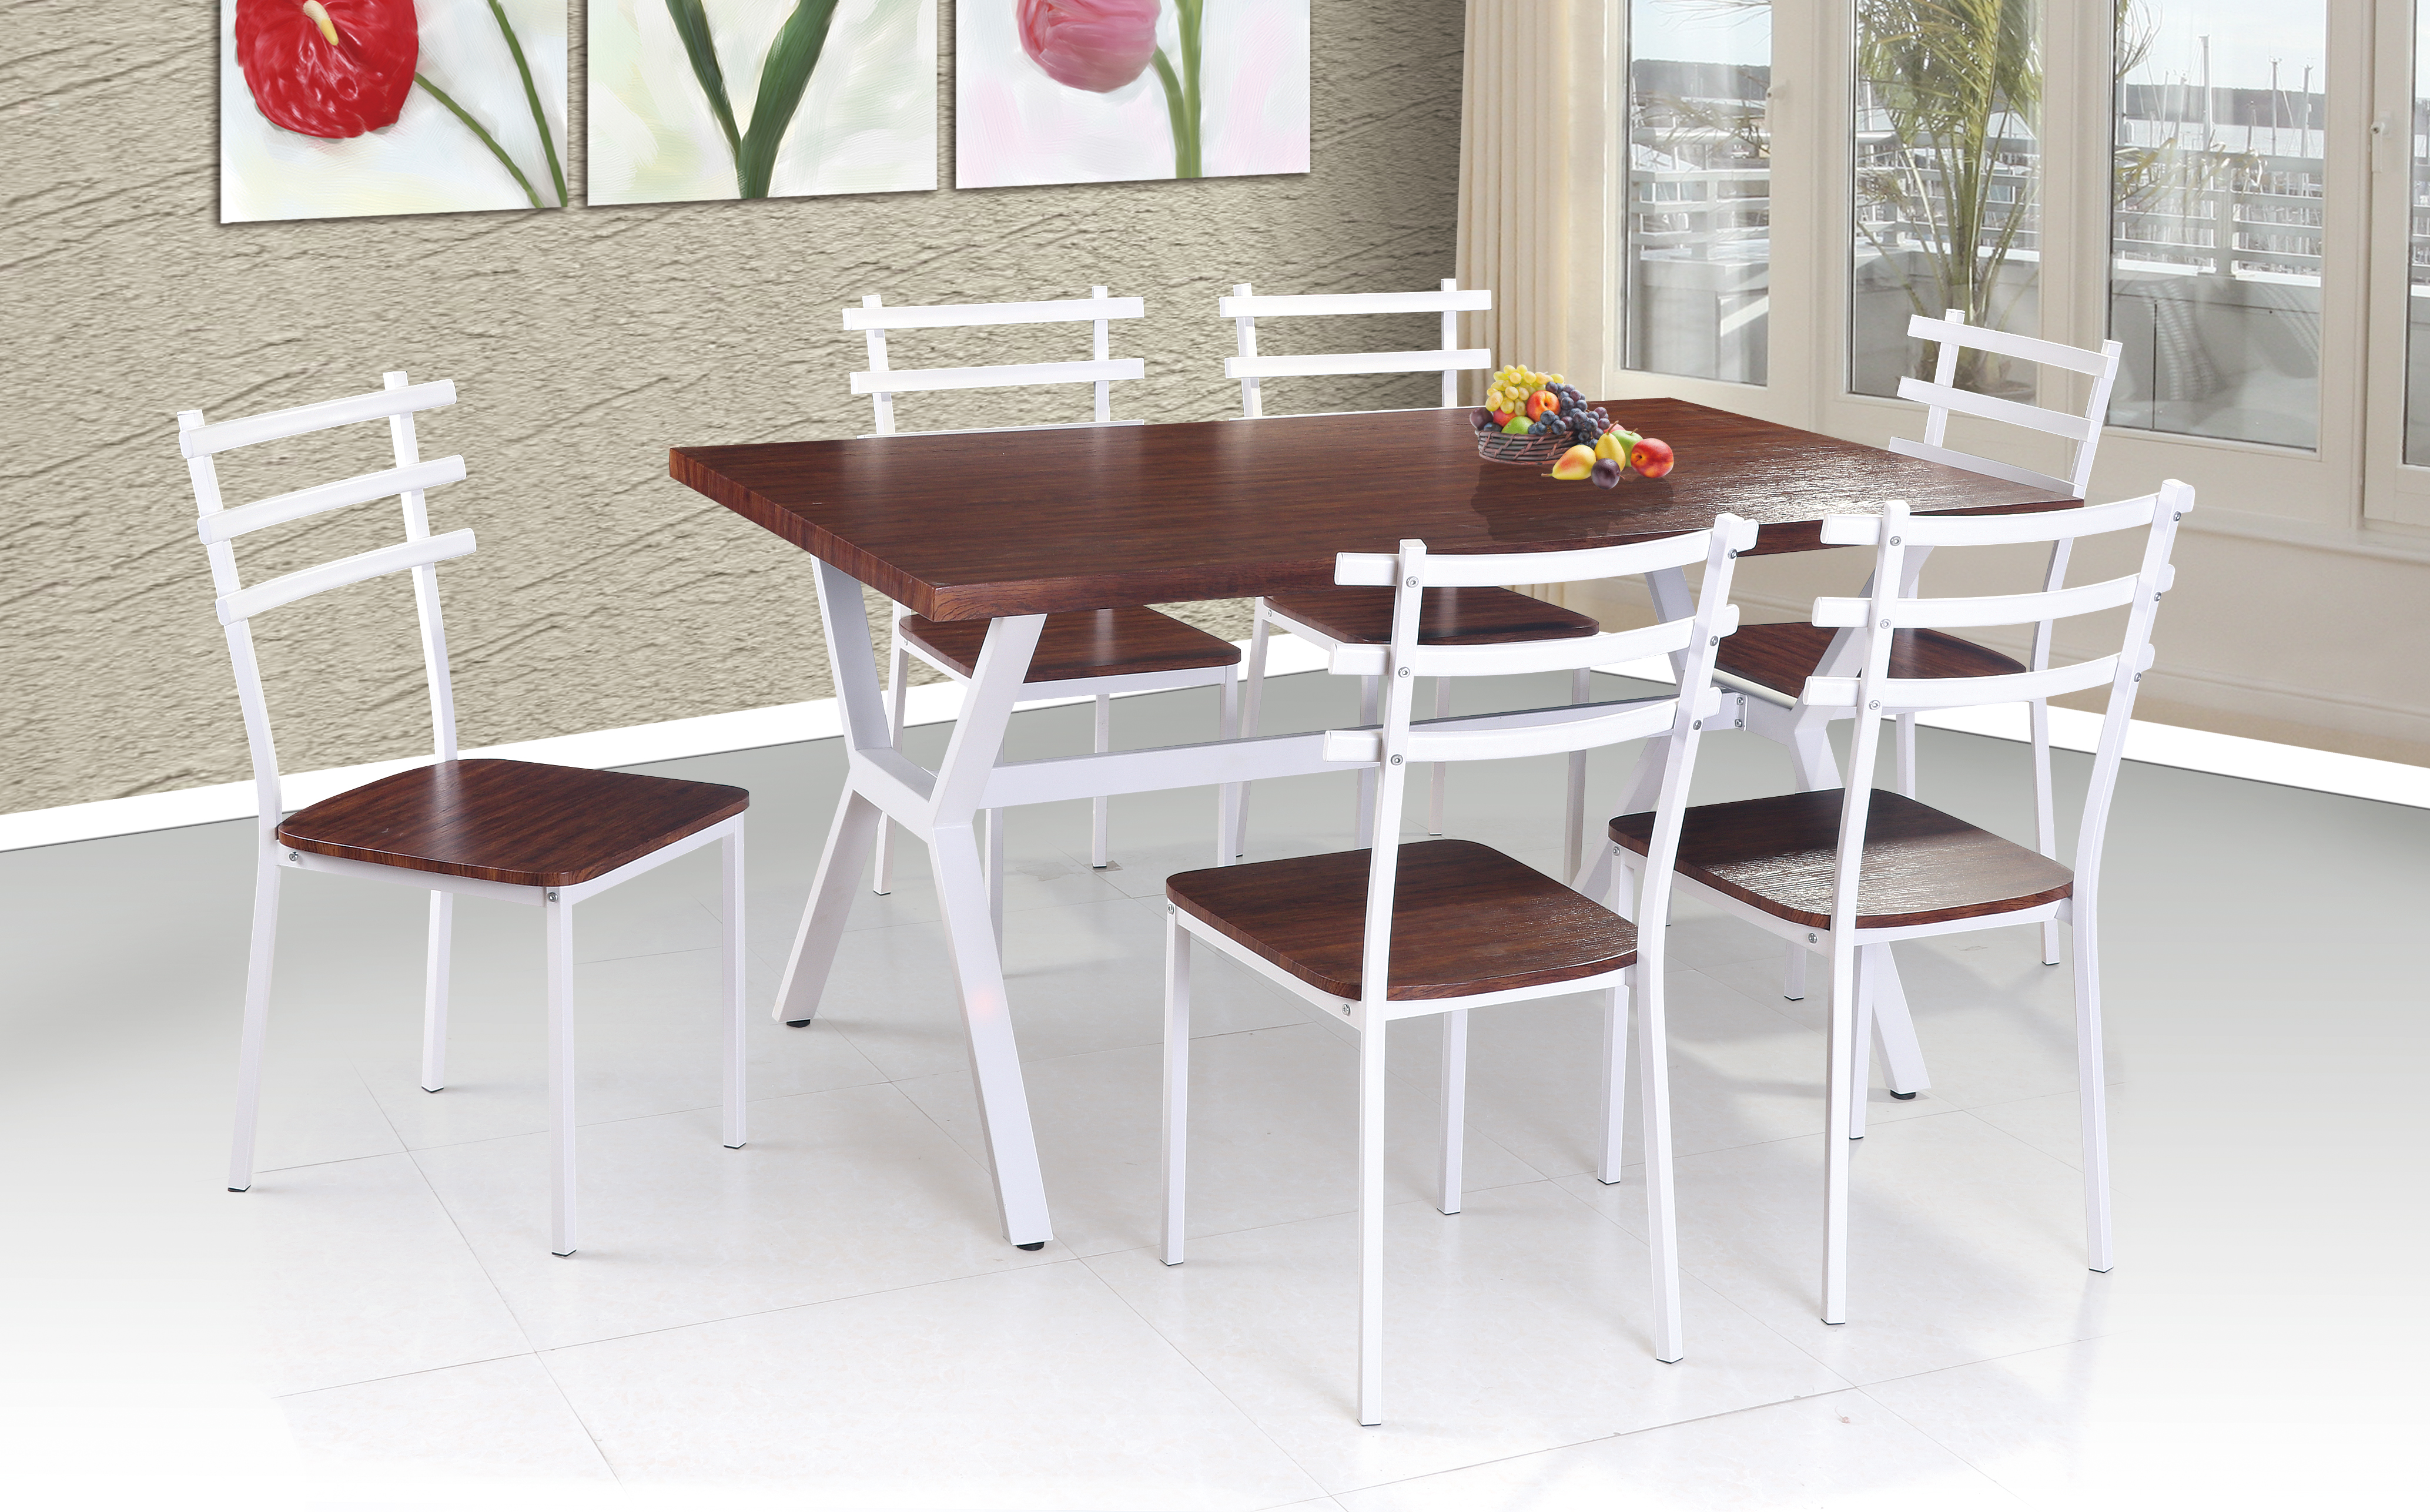 Well-designed Royal Dining Table - GS-5136 7pc dining set – Xinhai